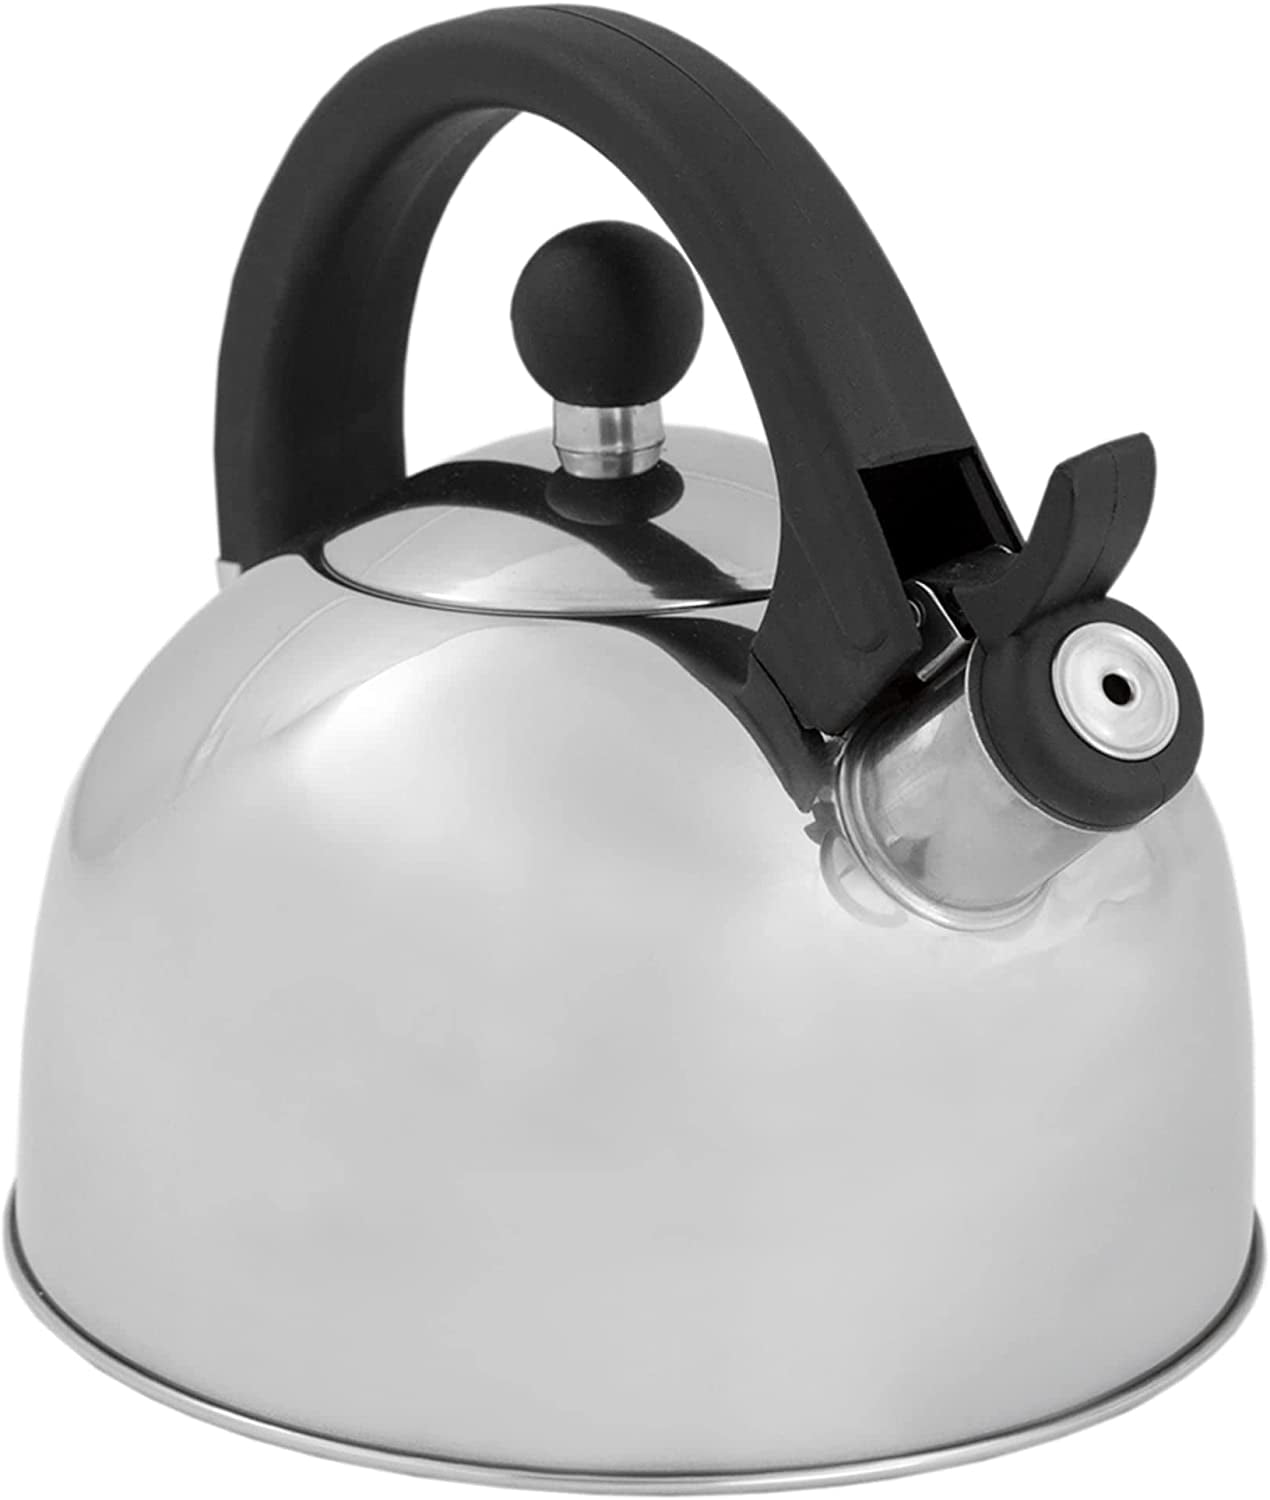 MAXCOOK 304 Stainless Steel Whistling Tea Kettle 2.1 Quart/2L, Suitable to  Boiling Water & Tea on Induction Stove, Gas Stove Top